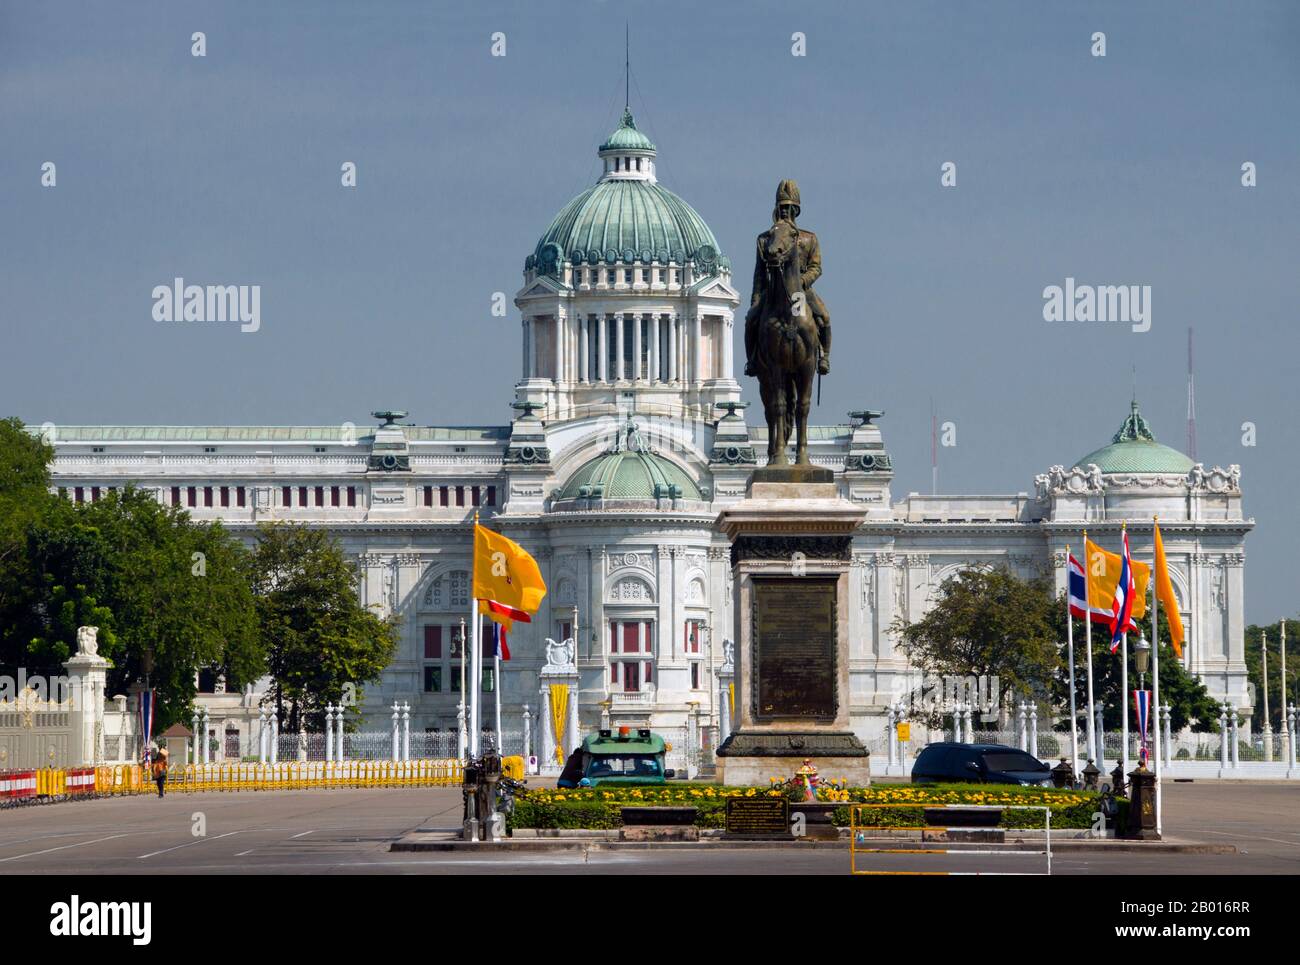 Thailand: King Chulalongkorn (Rama V) equestrian statue and the Ananta Samakorn Throne Hall, Bangkok.  Phra Bat Somdet Phra Poramintharamaha Chulalongkorn Phra Chunla Chom Klao Chao Yu Hua, or Rama V (20 September 1853 – 23 October 1910) was the fifth monarch of Siam under the House of Chakri.  The Ananta Samakhom Throne Hall was first commissioned during the reign of King Chulalongkorn. It was used as the headquarters of the People's Party during the four days of the 1932 Revolution (June 24-27), which transformed Thailand's political system from an absolute monarchy to a constitutional one. Stock Photo